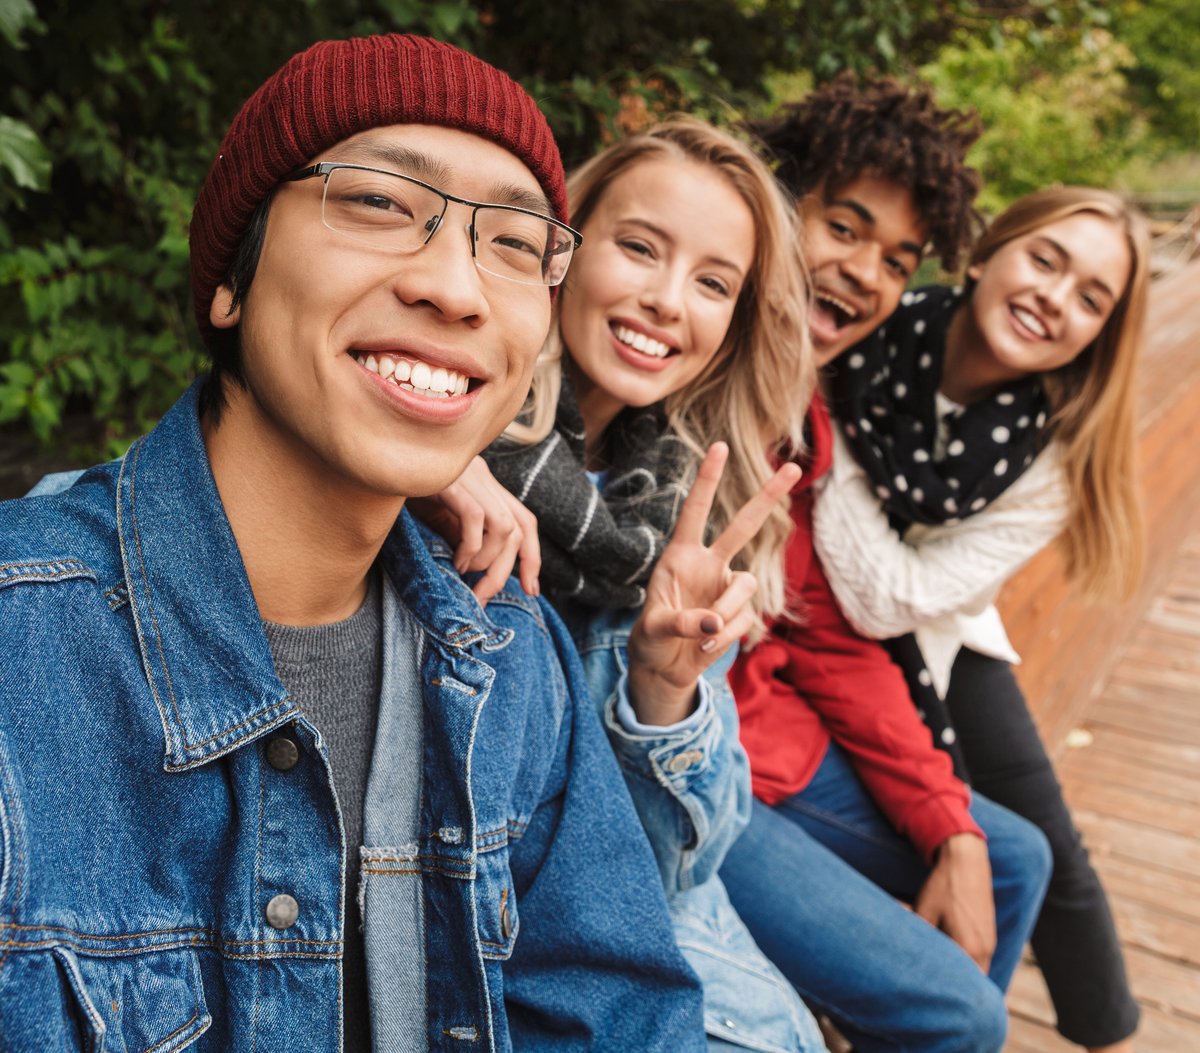 A picture of four young people sitting beside each other on red bricks besides a green bush. They are all smiling and looking at the camera. One of the girls is holding up her hand, making the peace sign with her fingers.